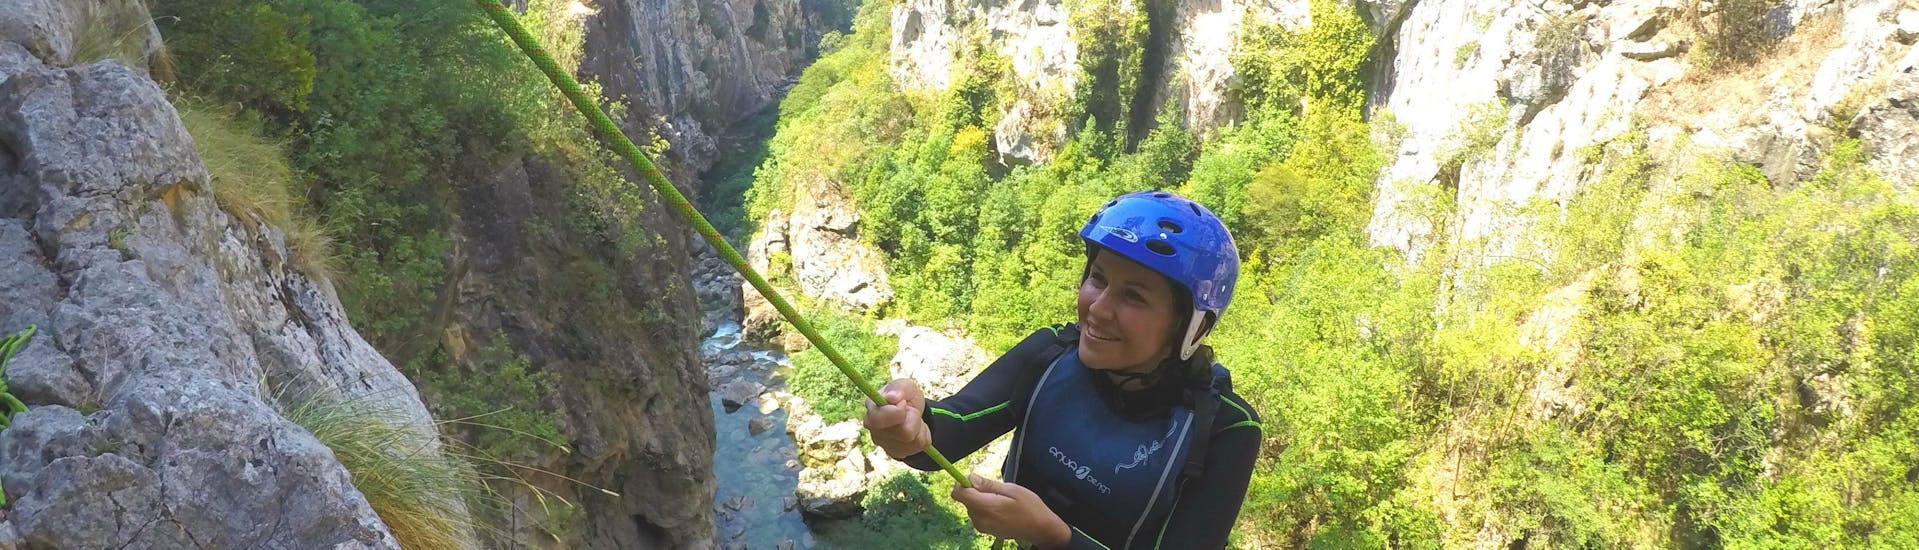 Canyoning in the Cetina River near Omiš - Extreme Tour with Dalmare Travel Agency Omiš